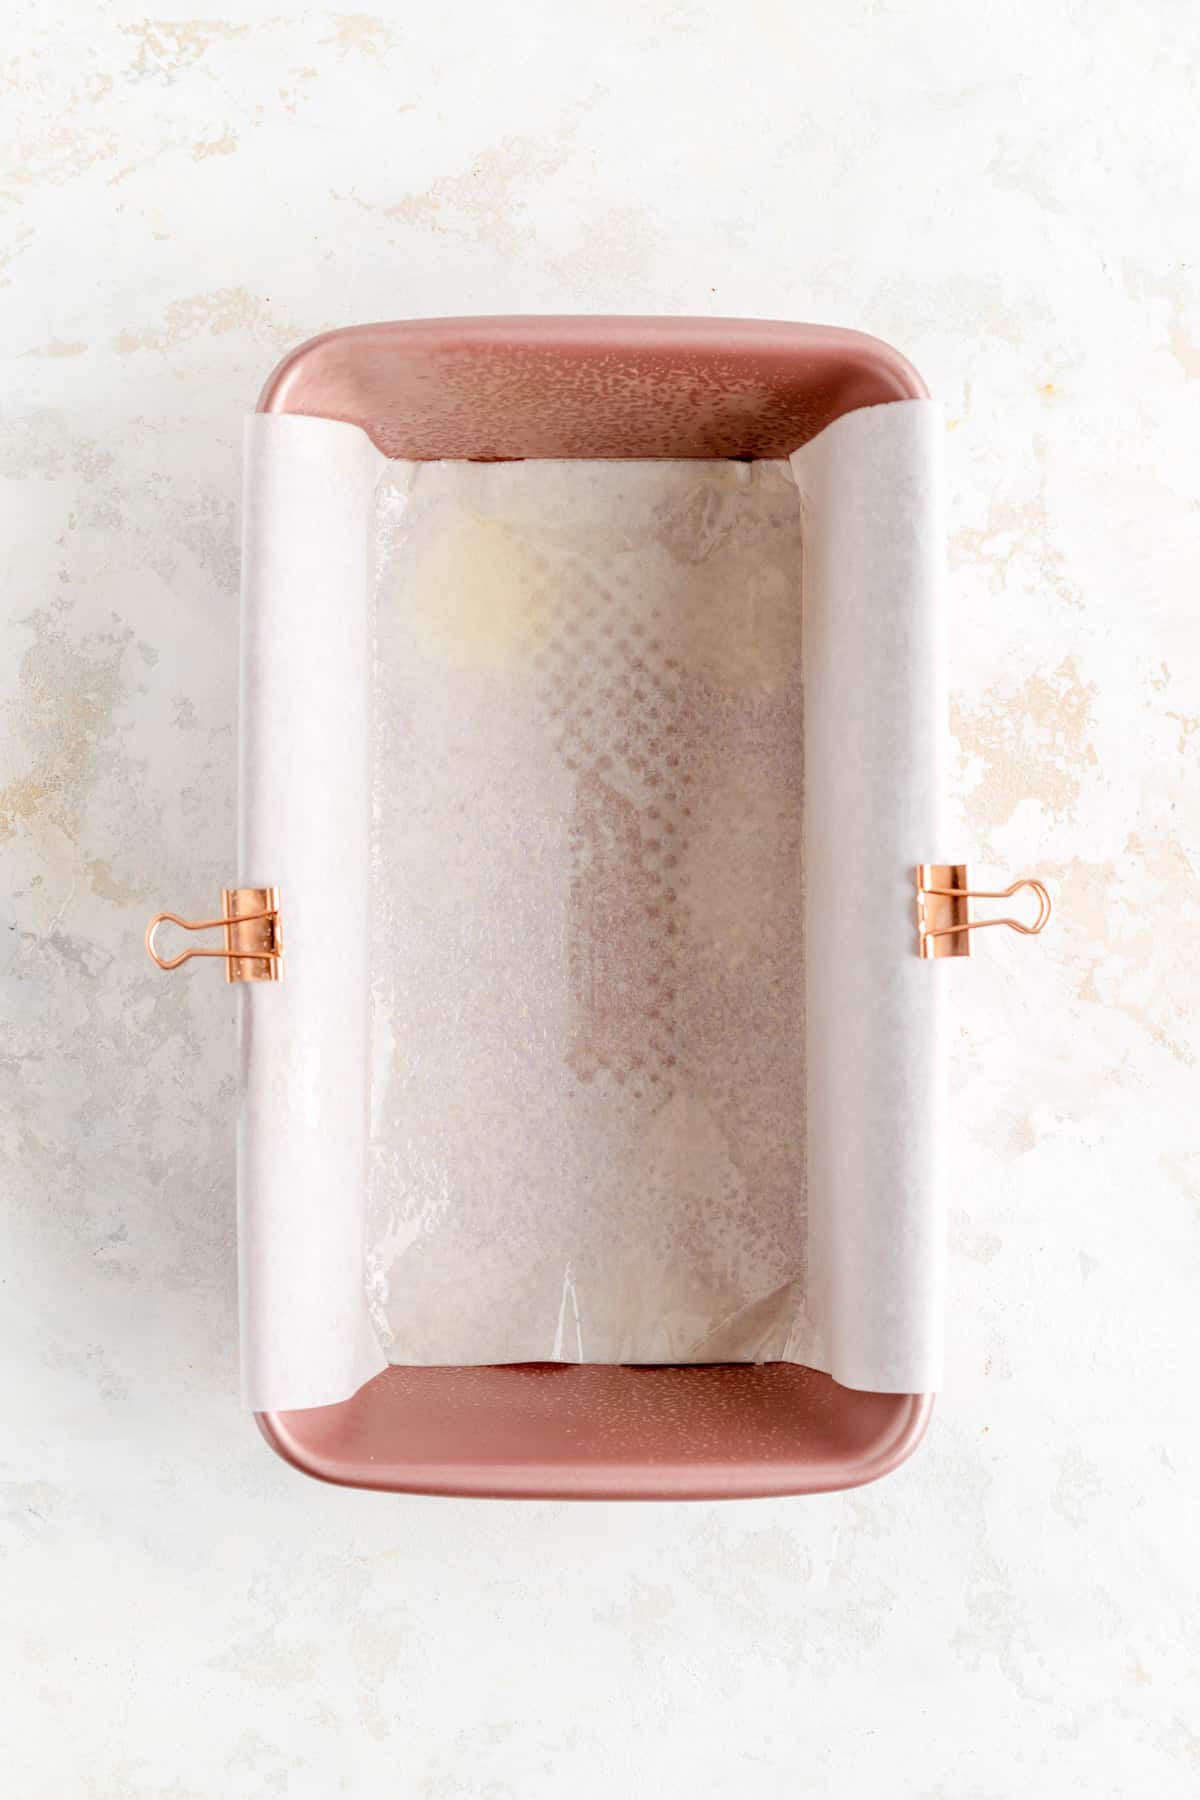 pink loaf pan lined with parchment paper secured with copper alligator clips.